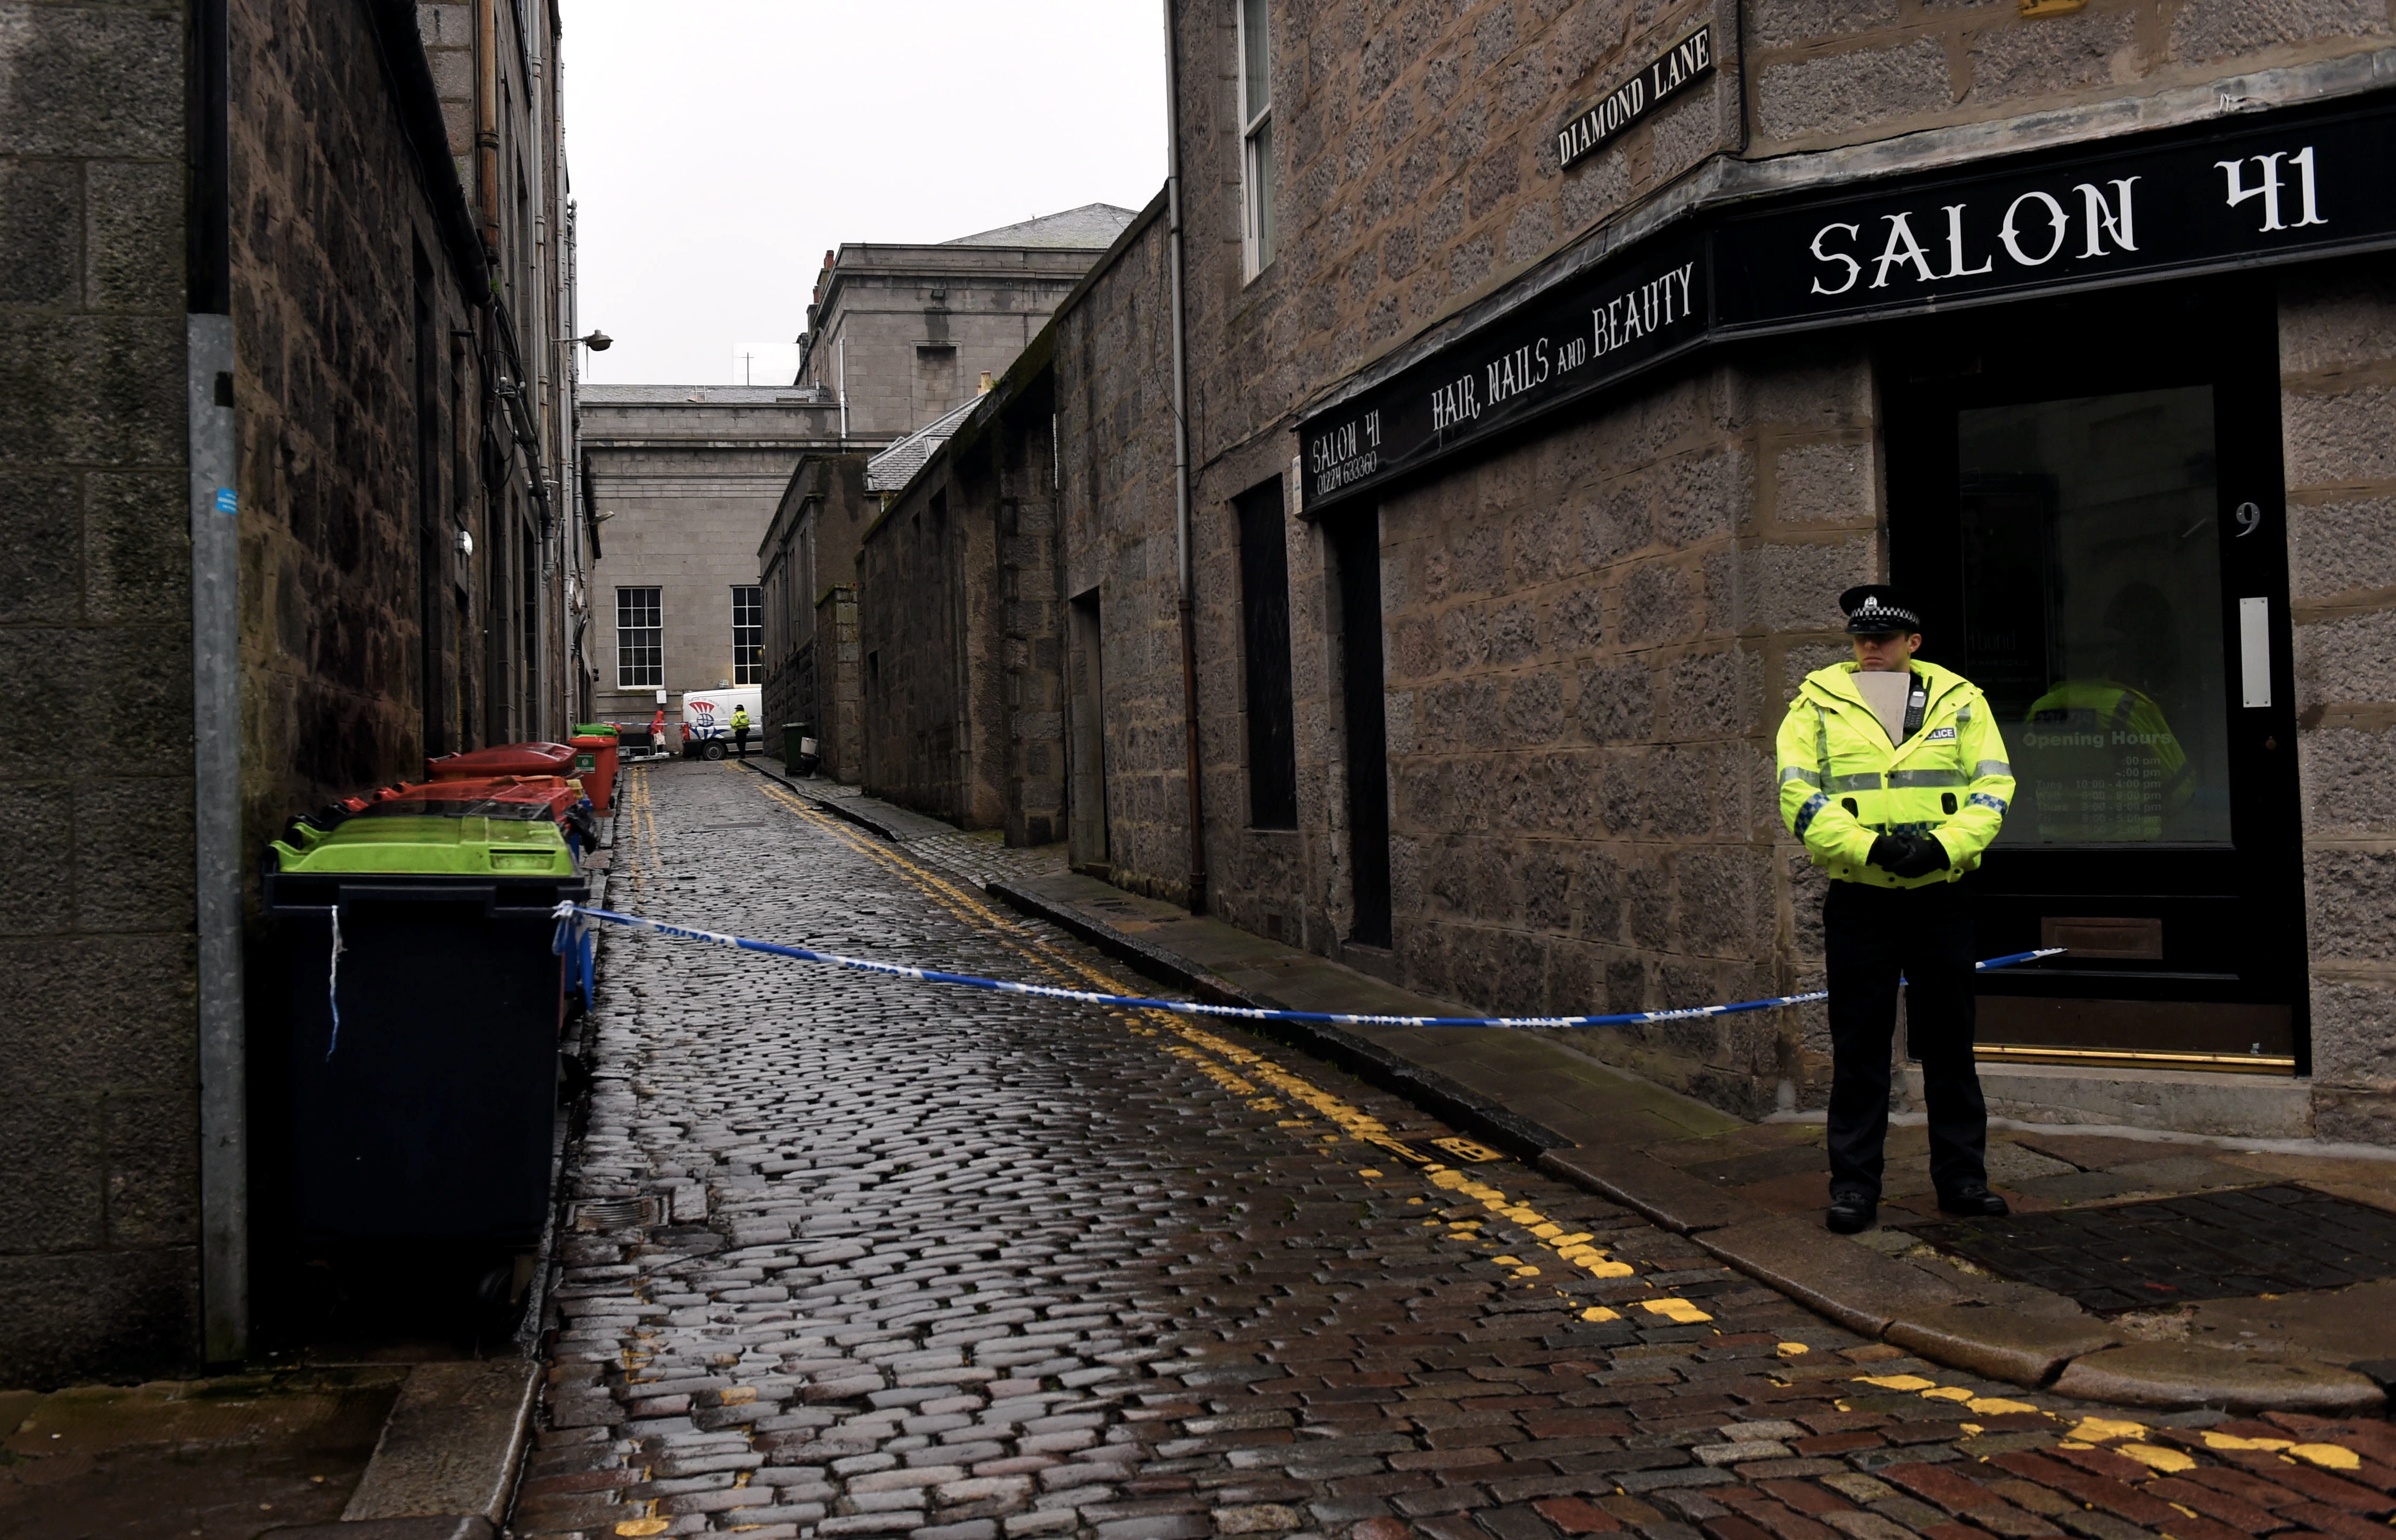 Diamond Lane was cordoned off by police.